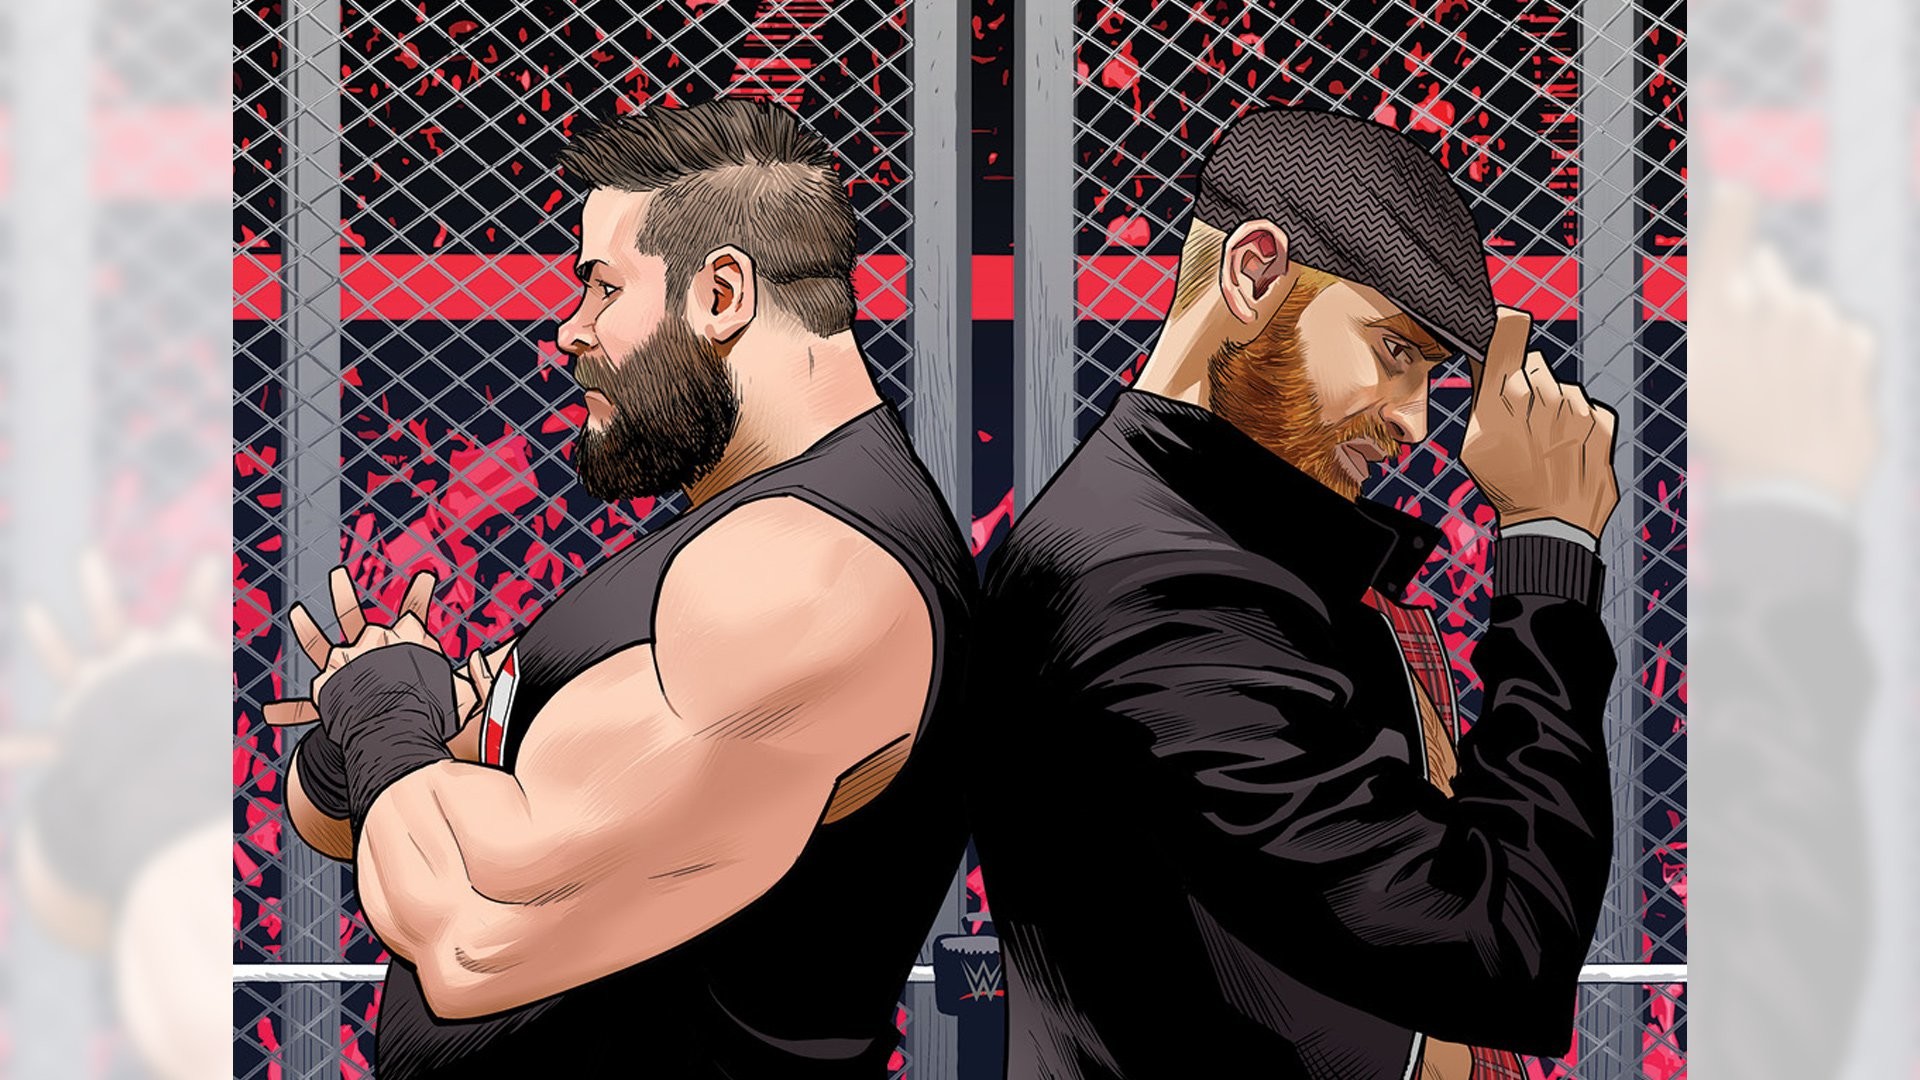 1920x1080 Kevin Owens and Sami Zayn are ready to “Fight Forever” in BOOM! Studios new  storyline